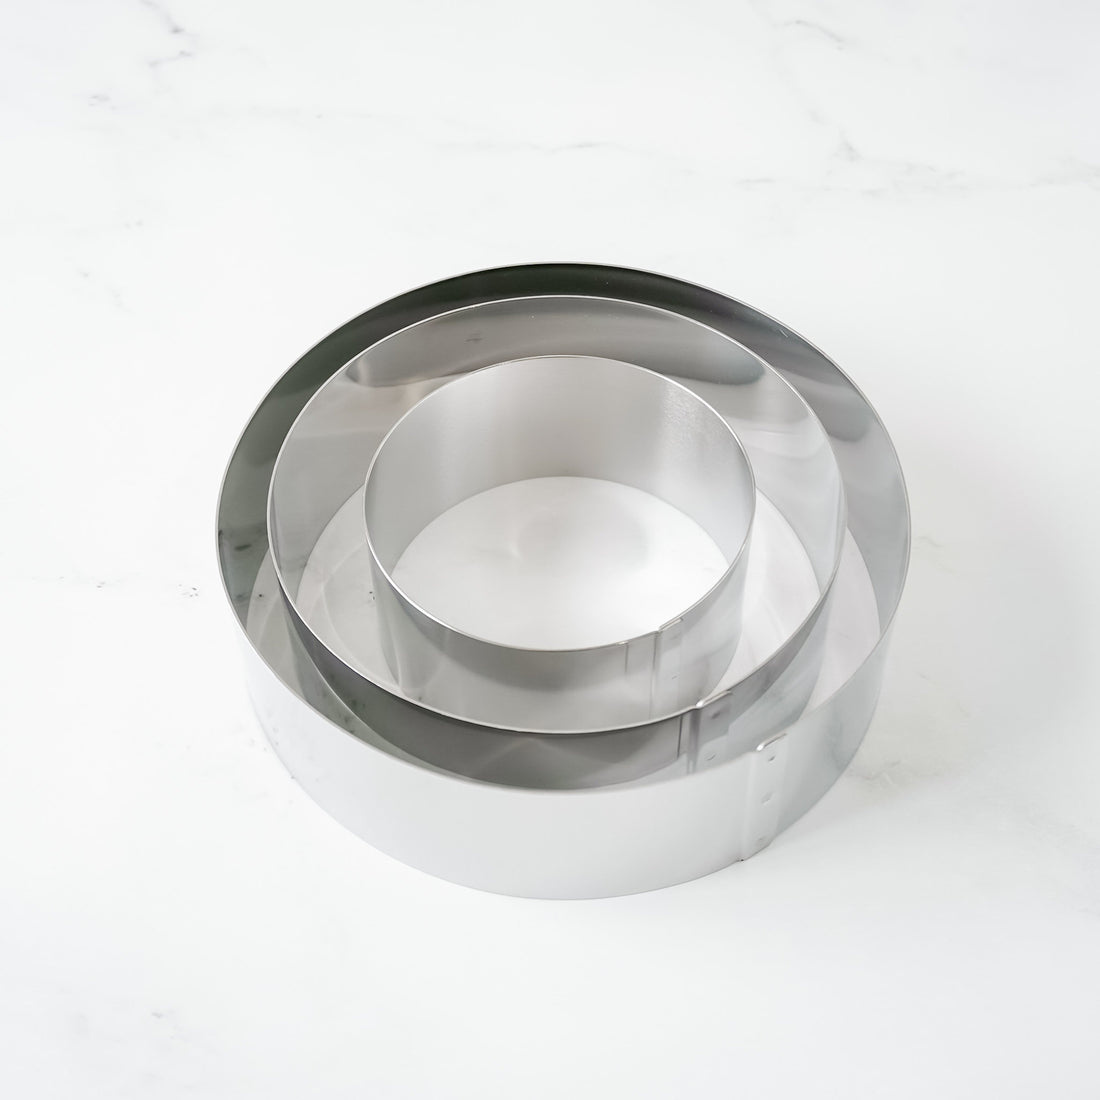 round cake mold in 3 sizes